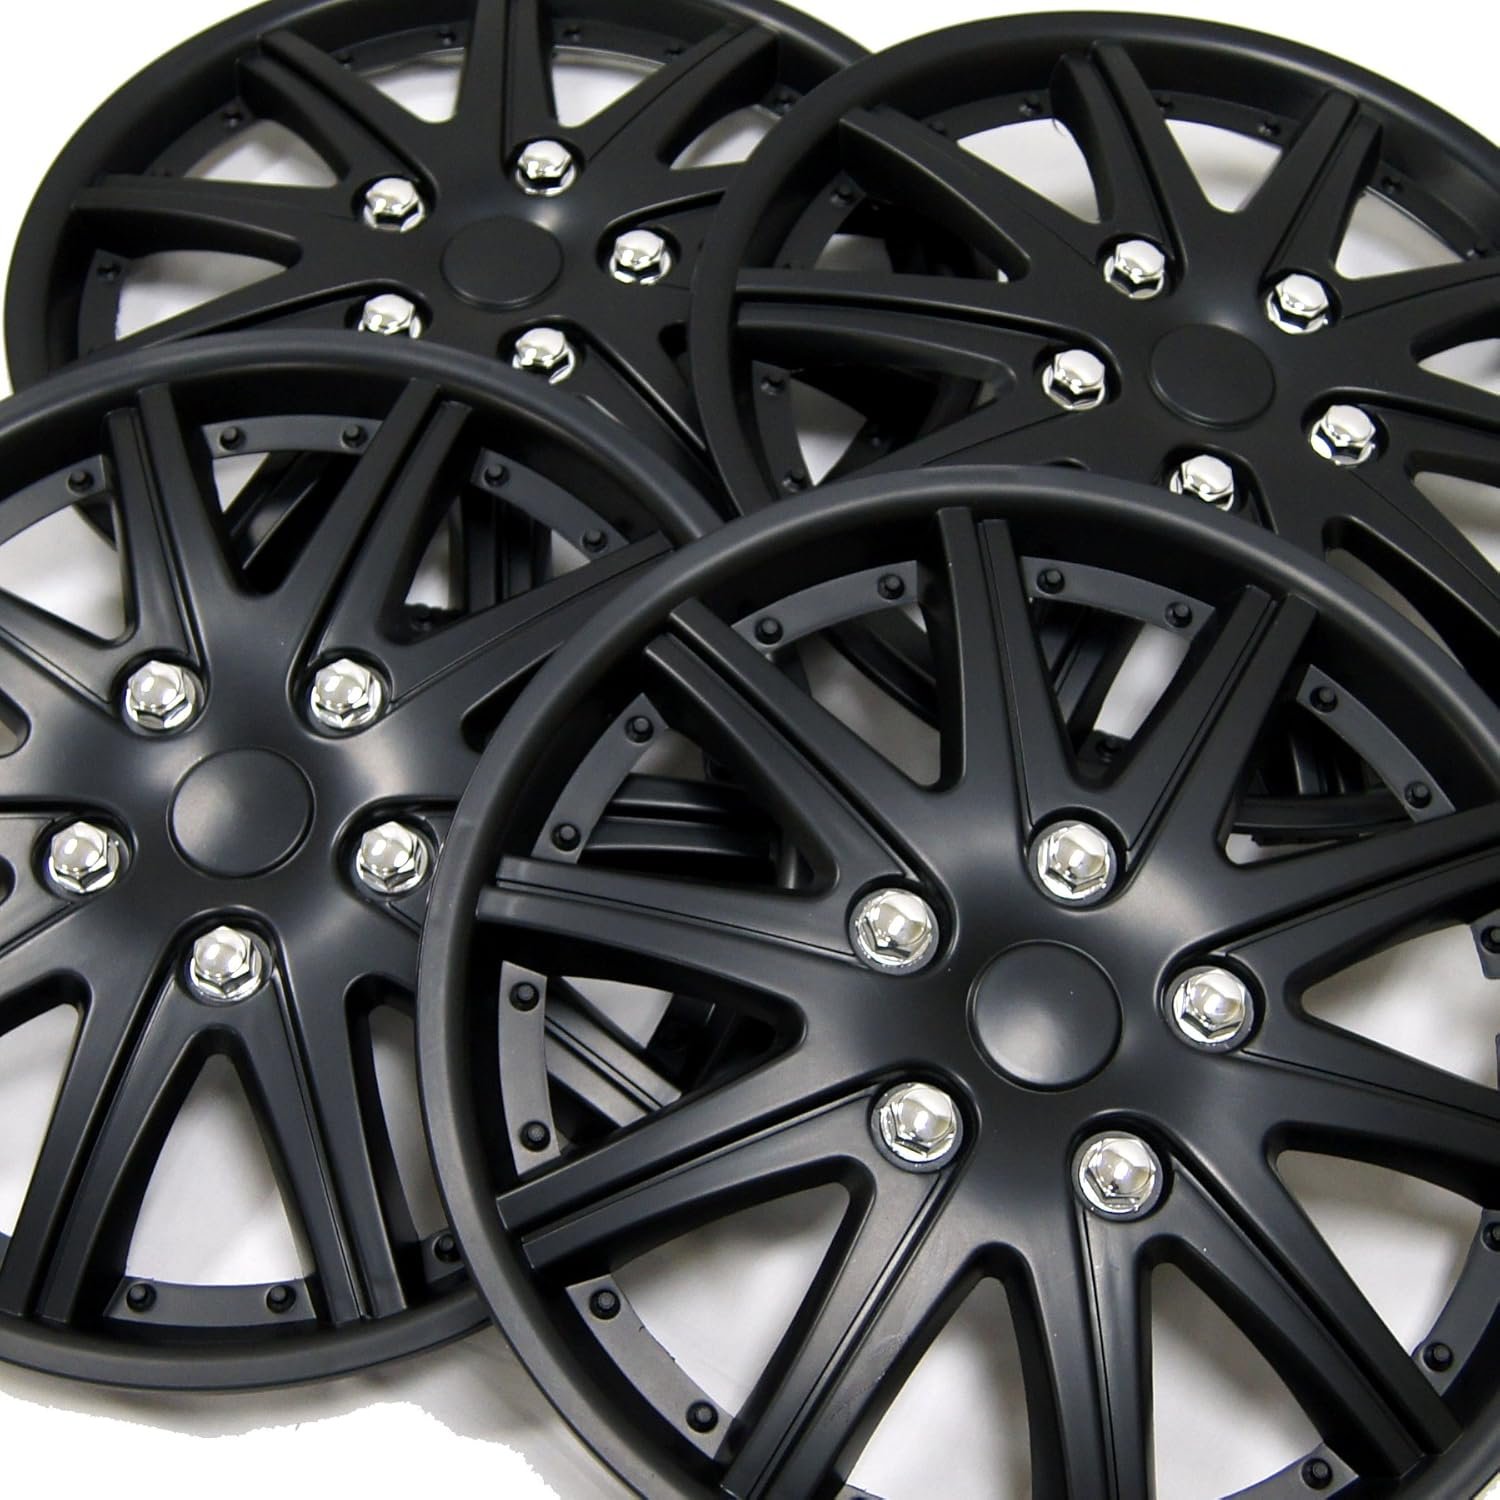 Tuningpros Hubcaps Review